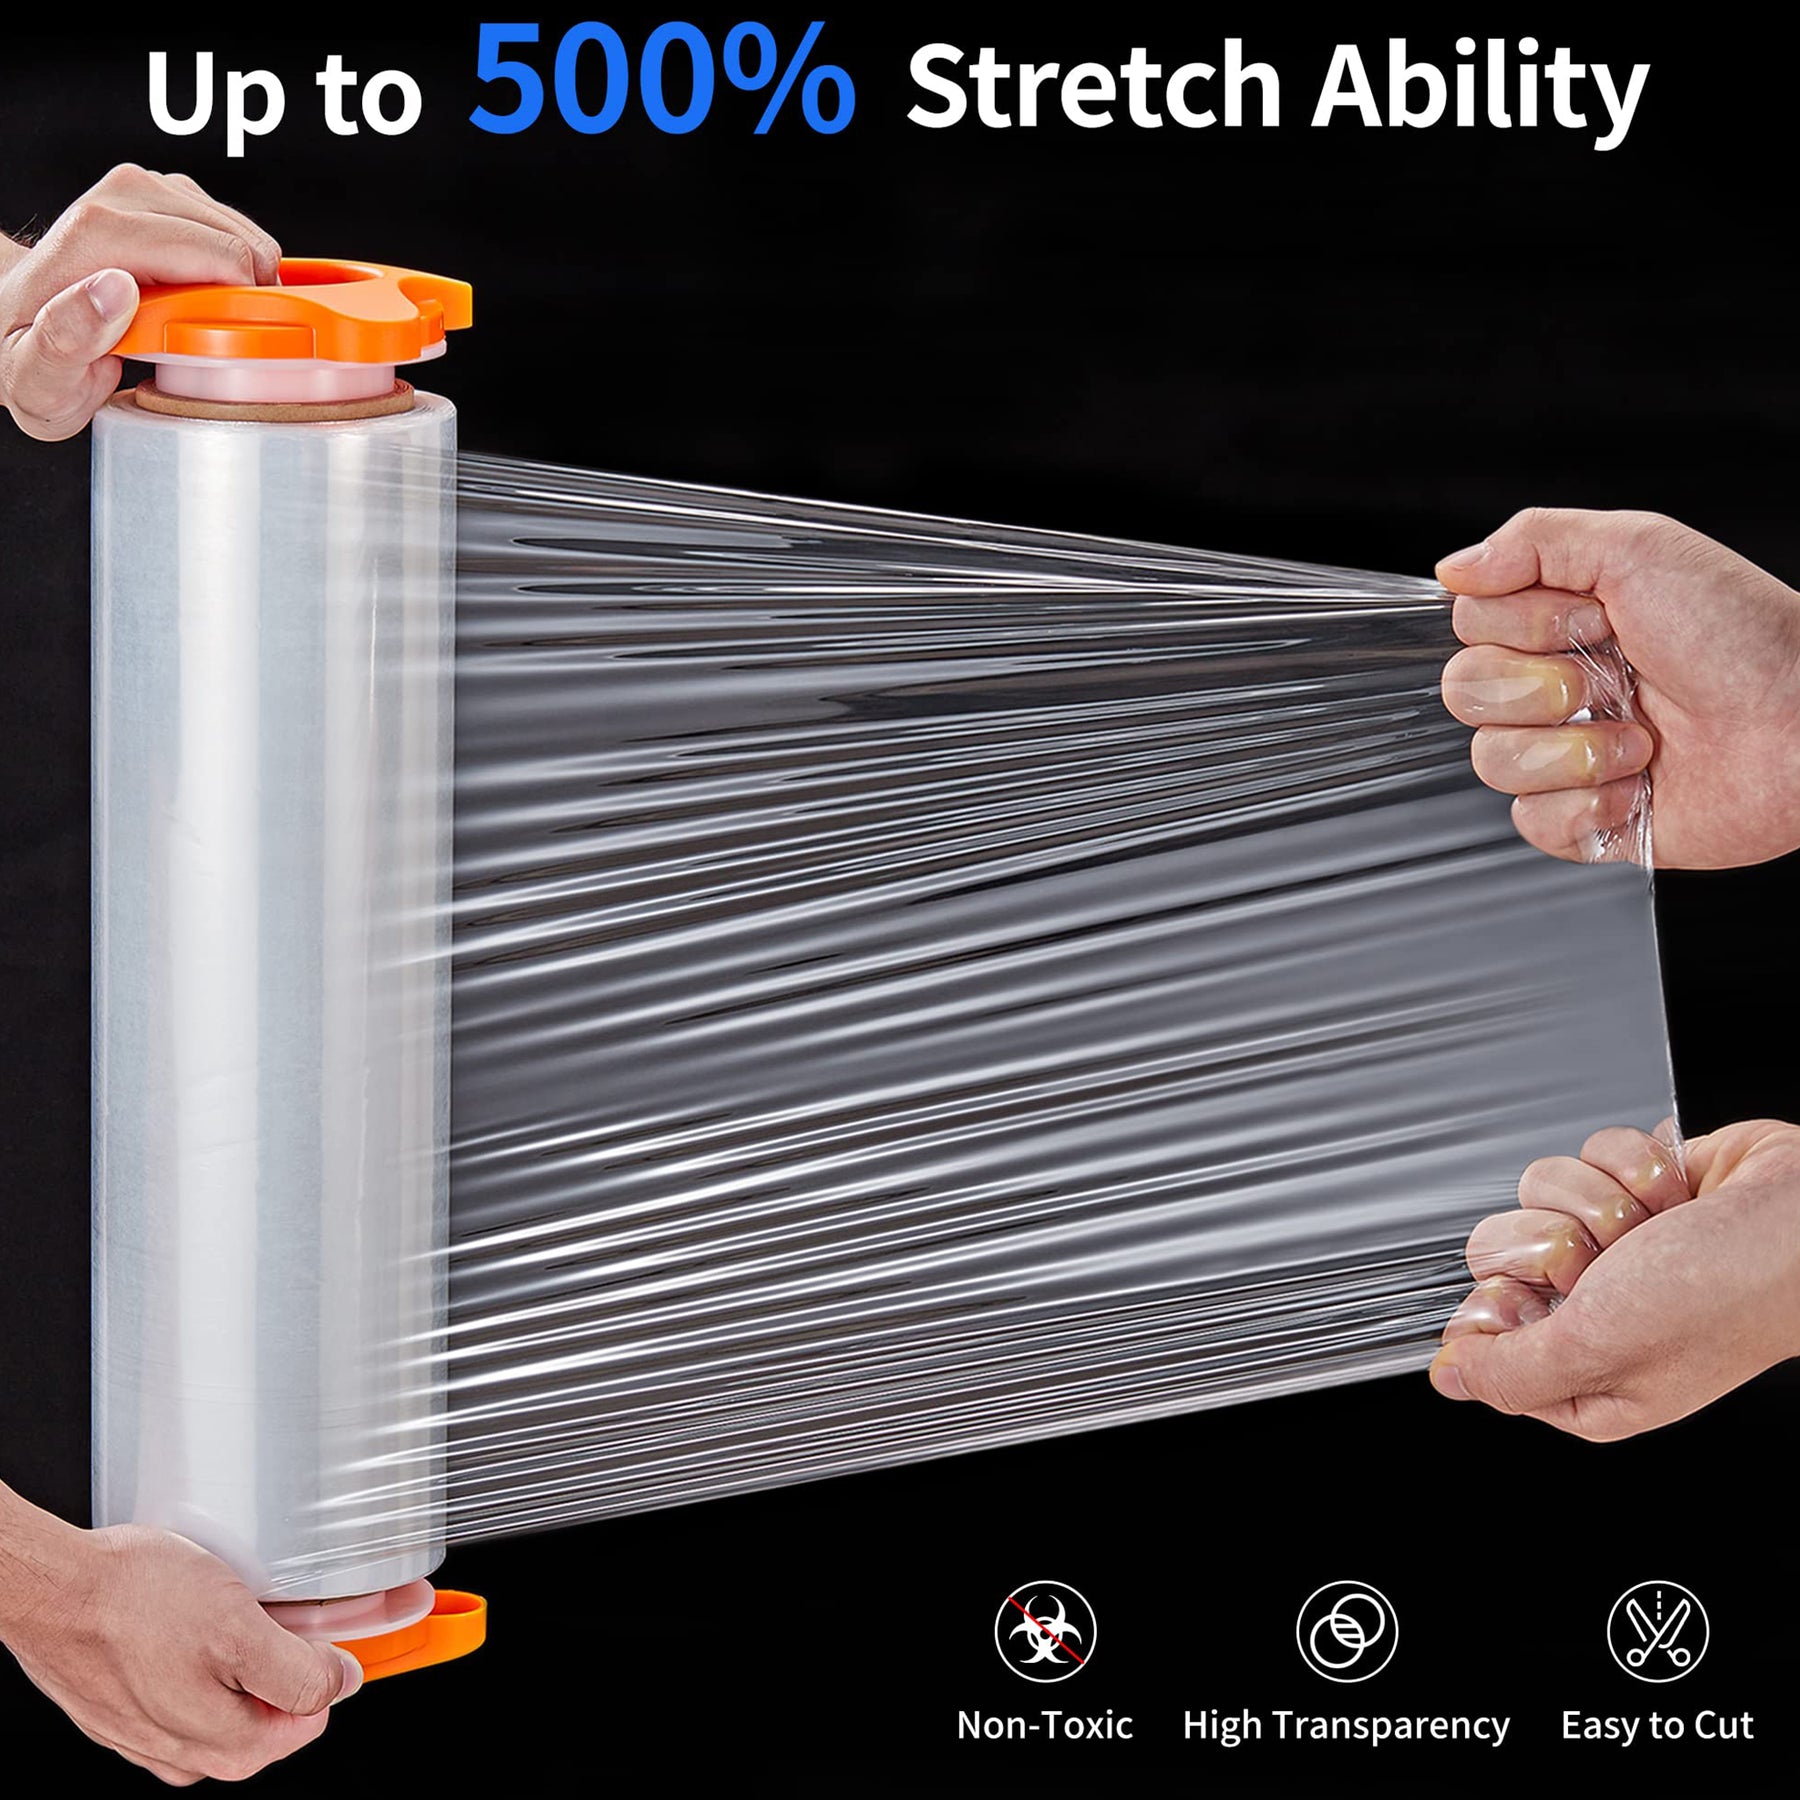 JARLINK 2 Pack Shrink Wrap Roll 500% Stretch, 15'' Stretch Wrap 1000ft, Clear Plastic Wrap with Handles for Pallet Wrapping, Moving, Packing, and Shipping, 60 Gauge Industrial Strength